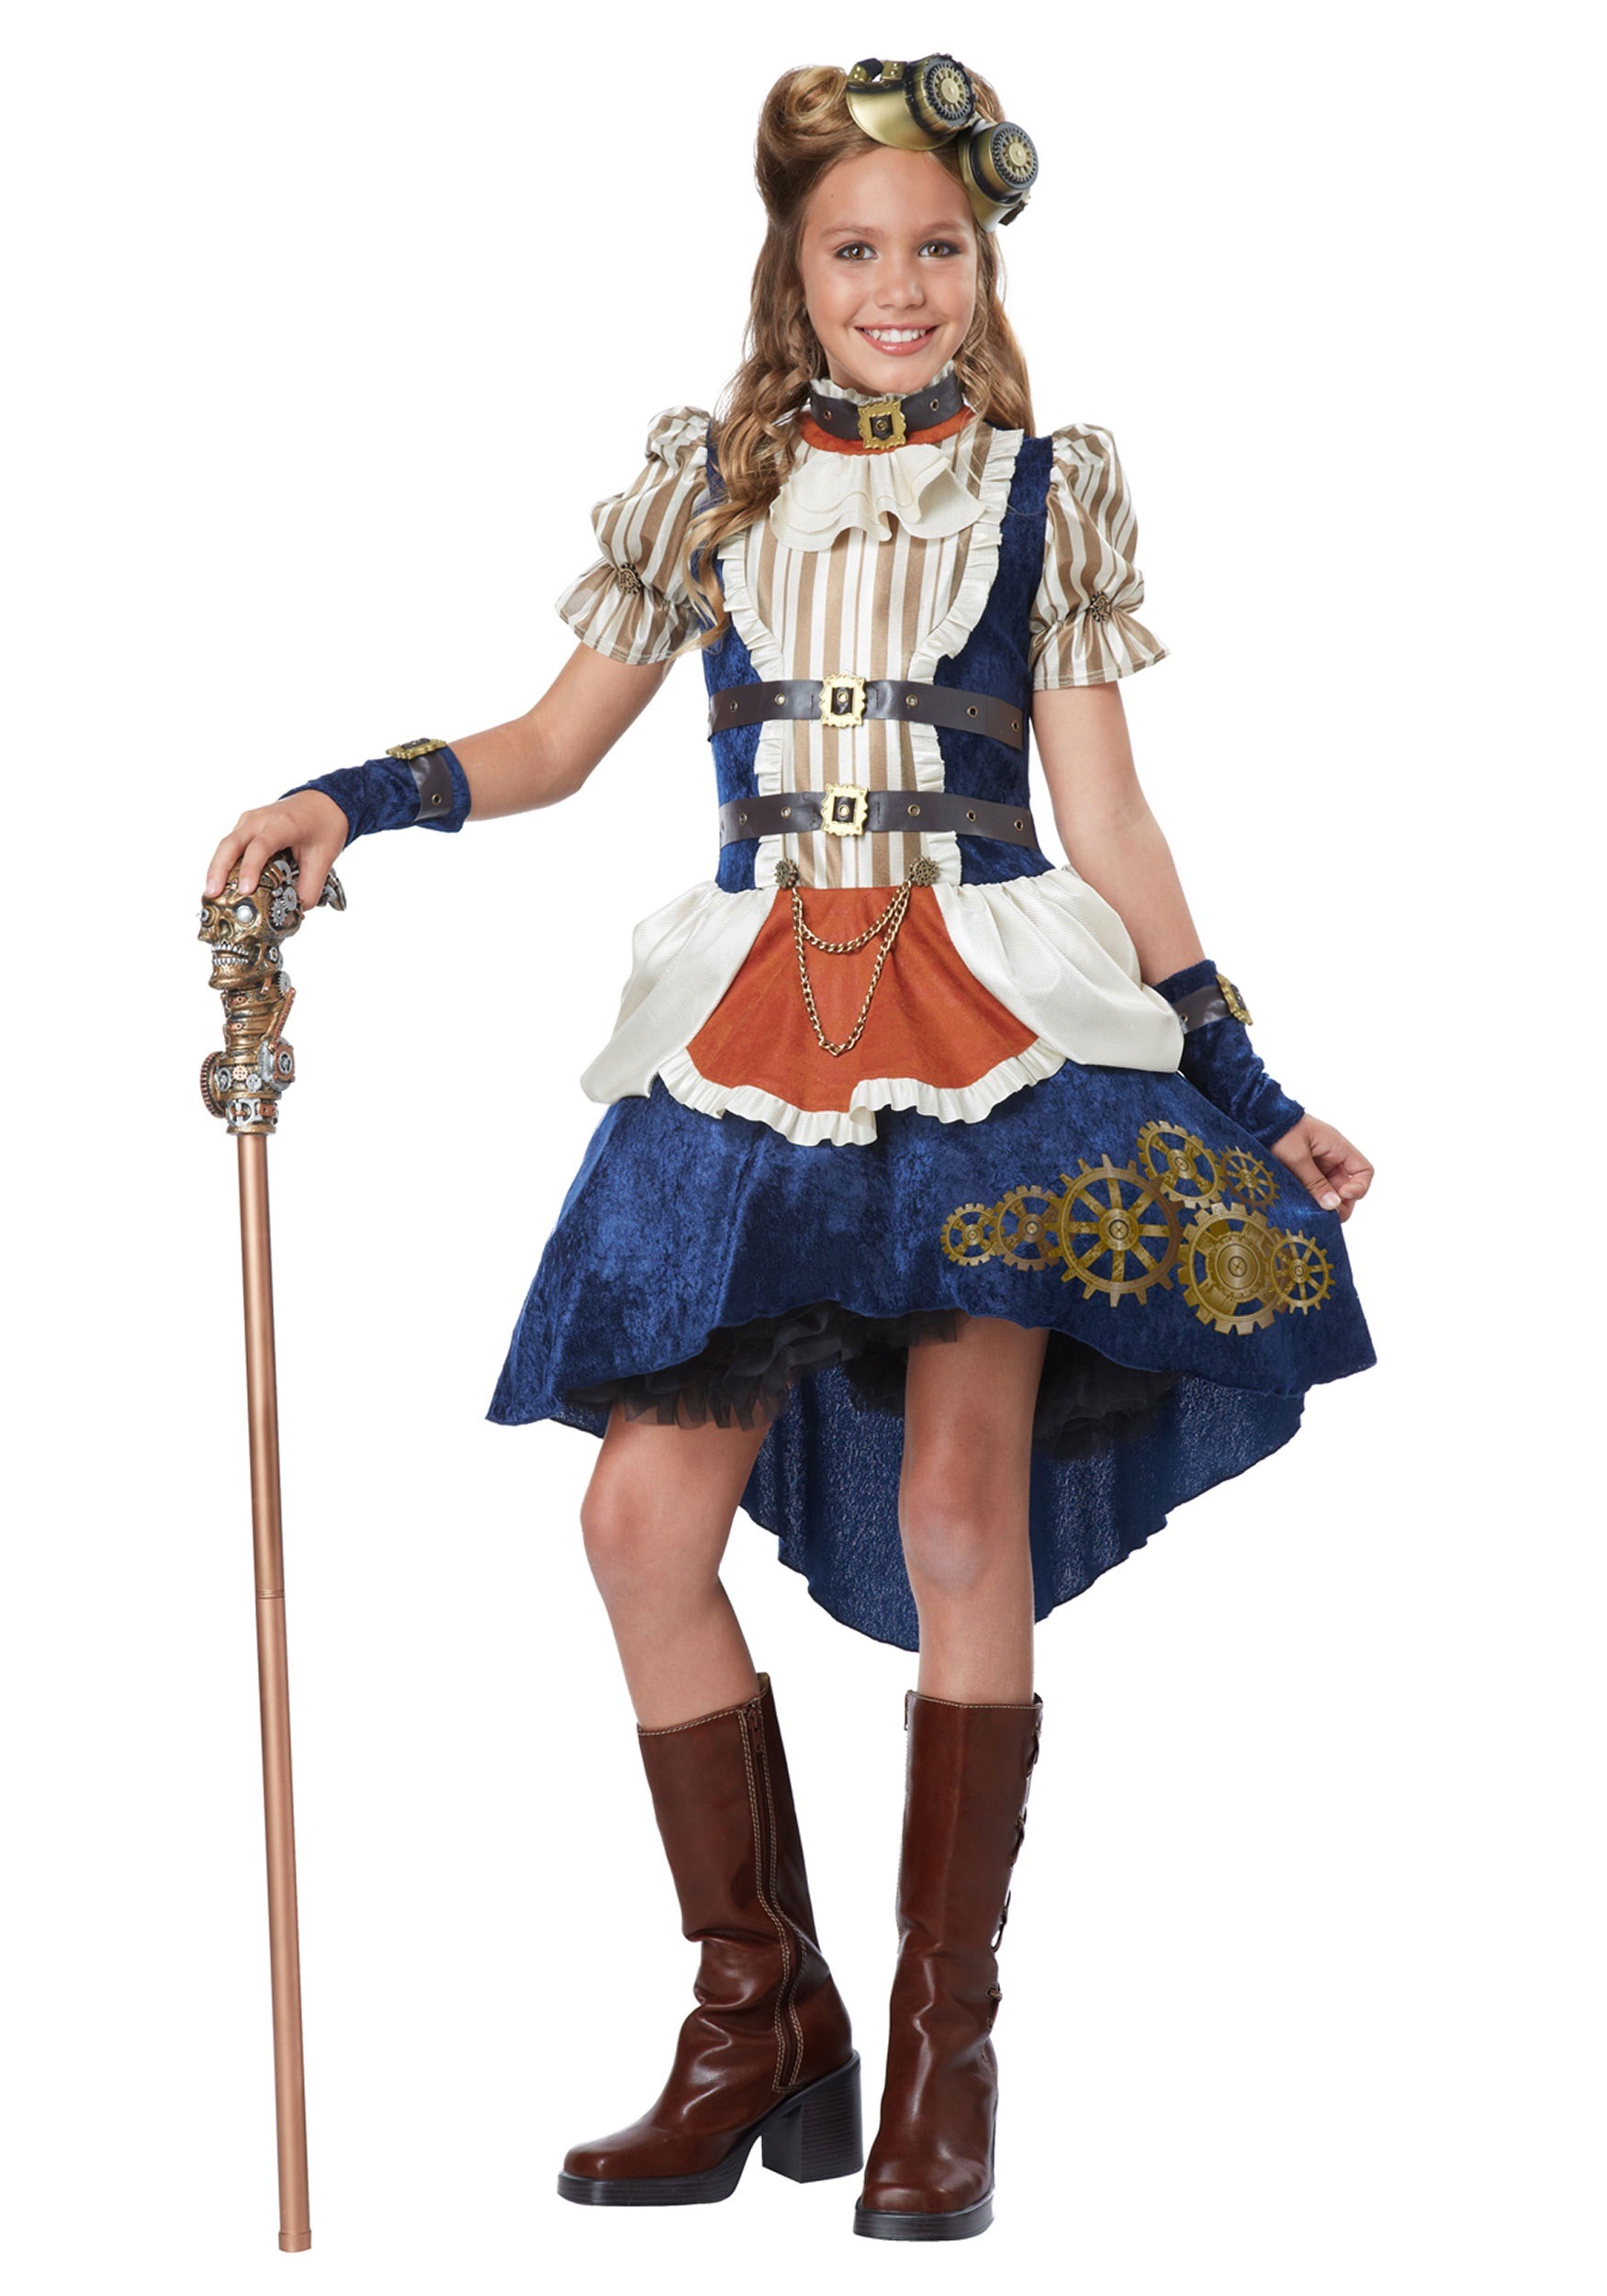 Image of Teen Girls Steampunk Costume | Girl's Historical Costume ID CA04090-S